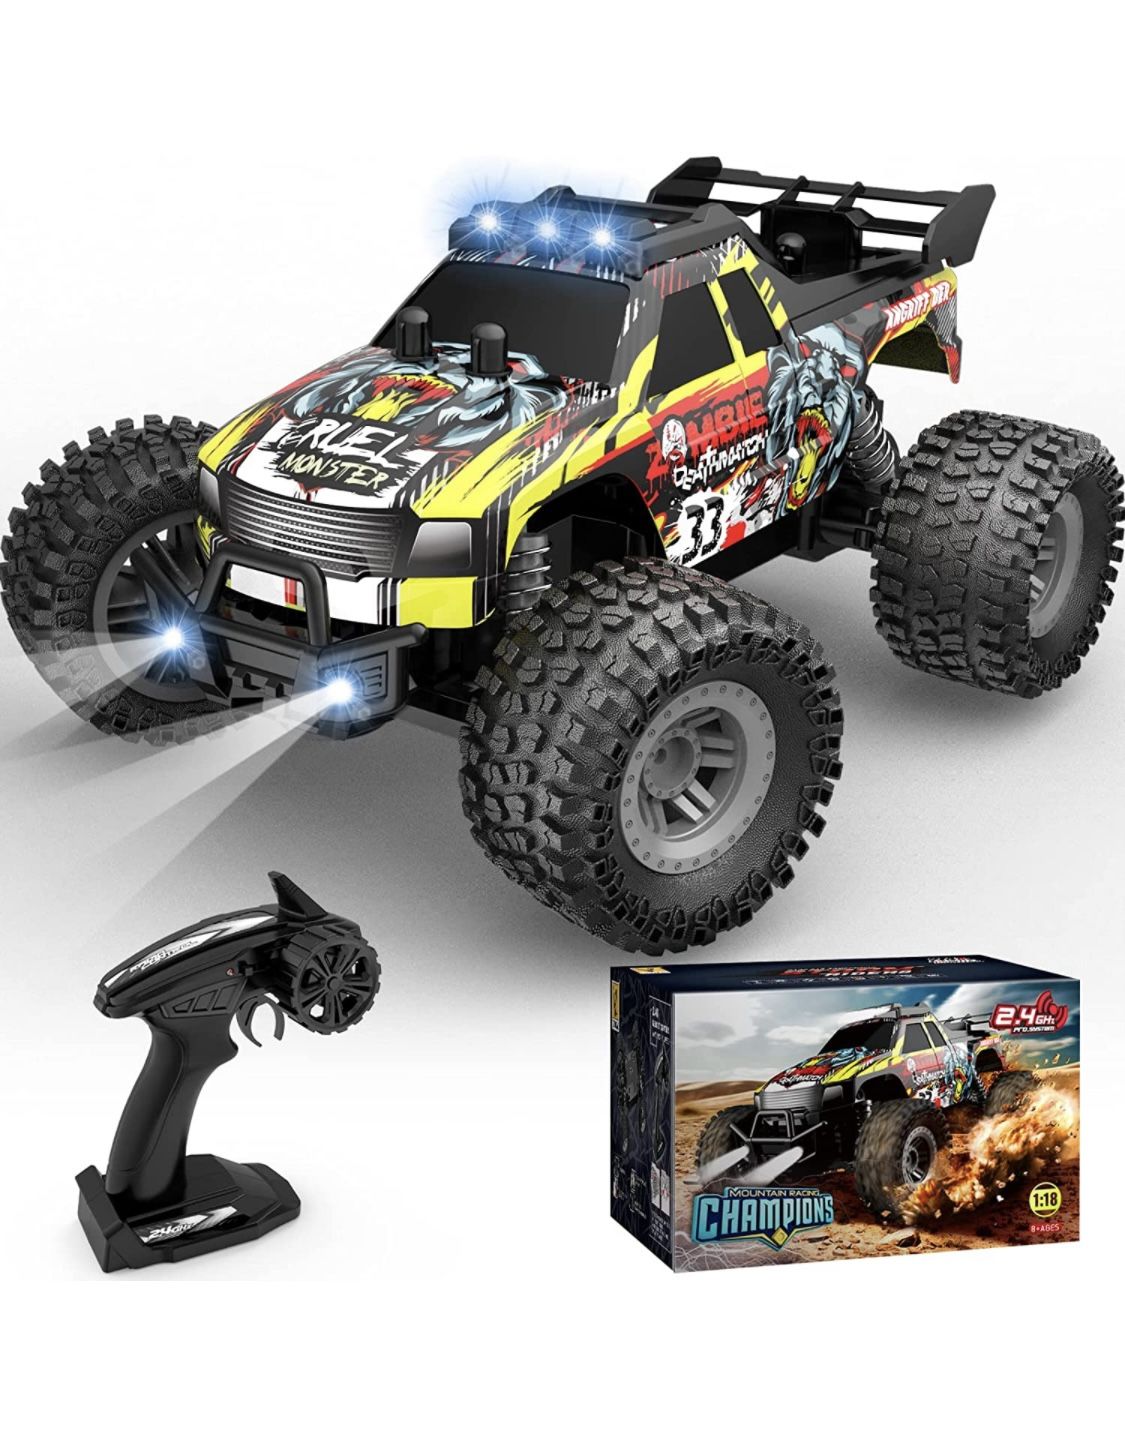 Remote Control Car for Boys & Girls, All Terrain & Off-Road Monster Truck with Flash LED,2 Rechargeable Batteries for 80 Mins Play,2.4GHz, Perfect Bir